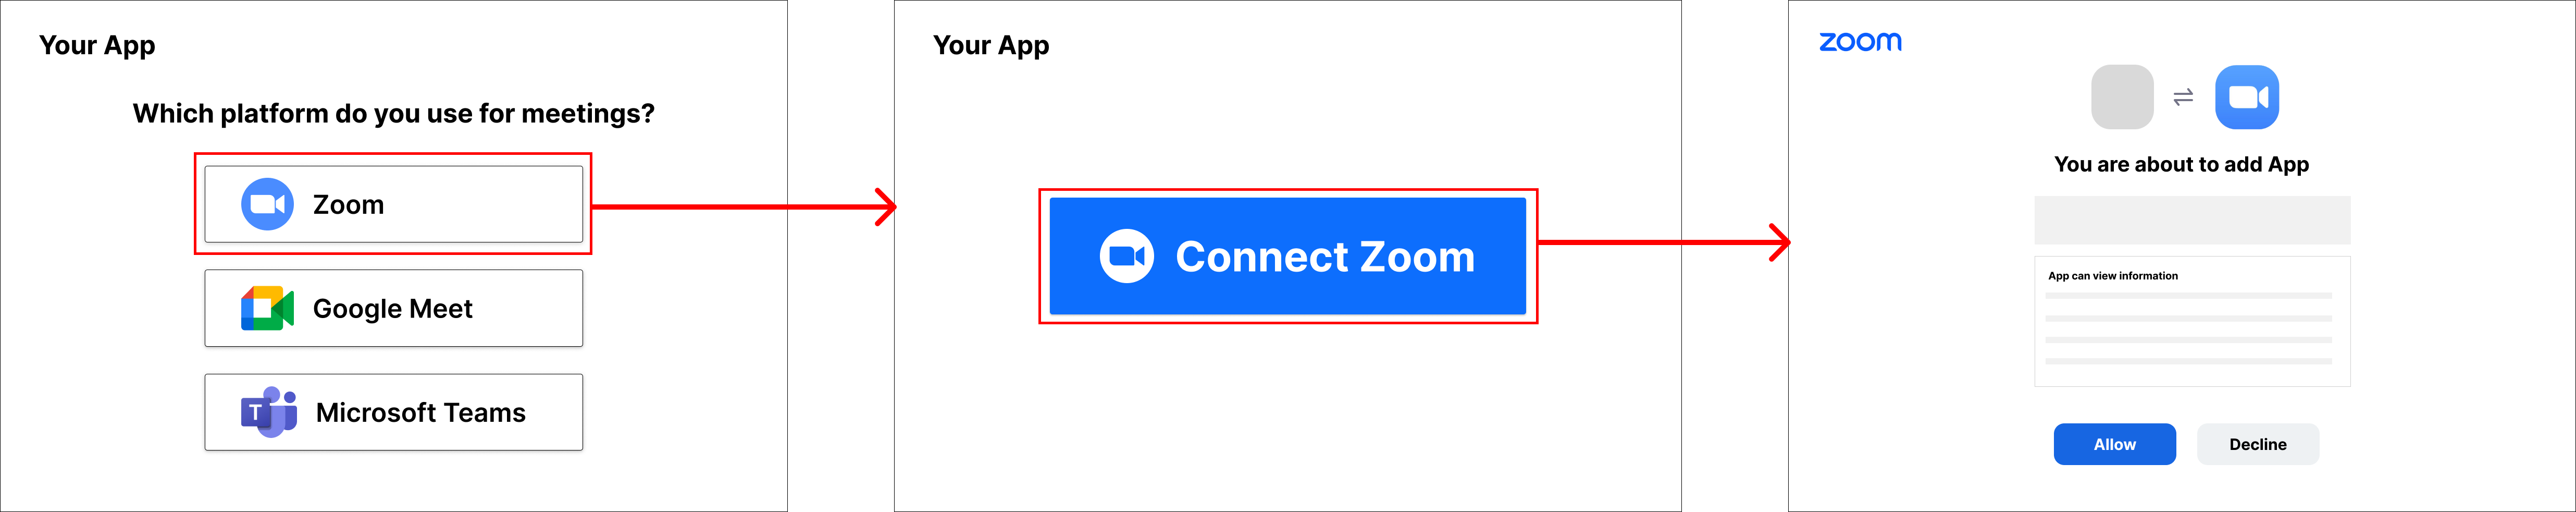 Shows an example onboarding flow where the user first selects which meeting platform they use, then the next screen is a button to connect their Zoom account, which finally leads to the Zoom OAuth screen.